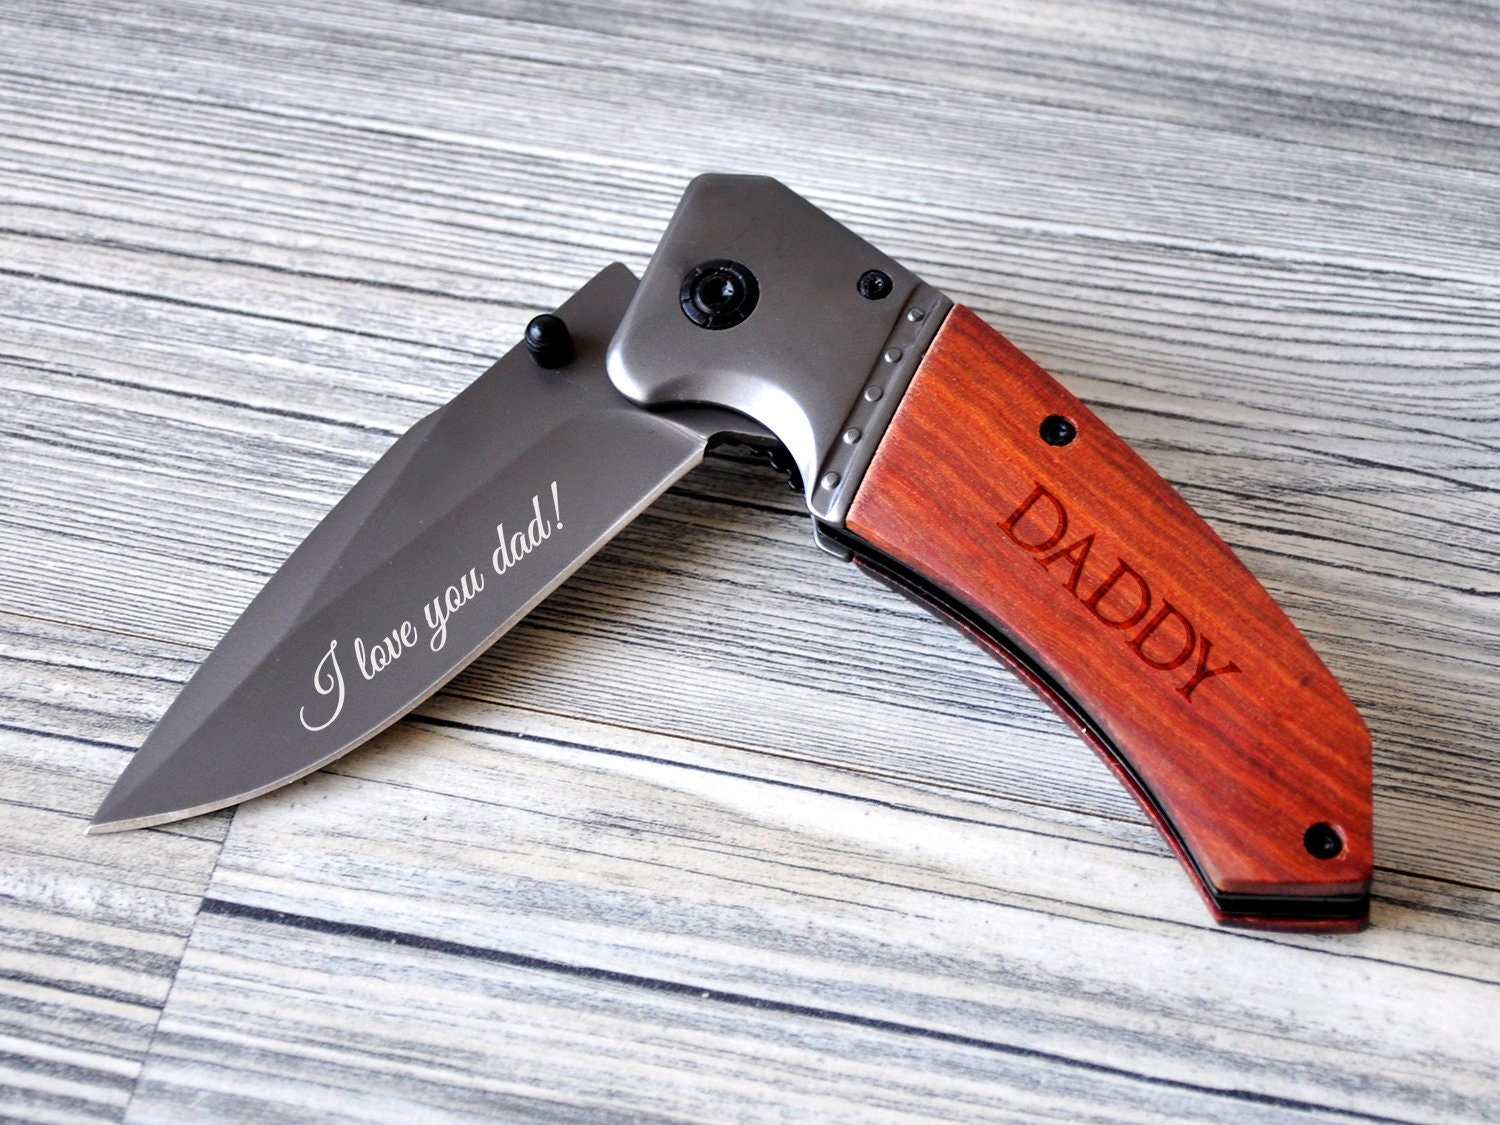  Personalized Engraved Pocket Knife With Gift Box - Custom  Knifes For Husband, Boyfriend, Dad, Son, Brother, Uncle, Grandpa As  Birthday, Anniversary, Father's Day, Christmas Gifts : Tools & Home  Improvement